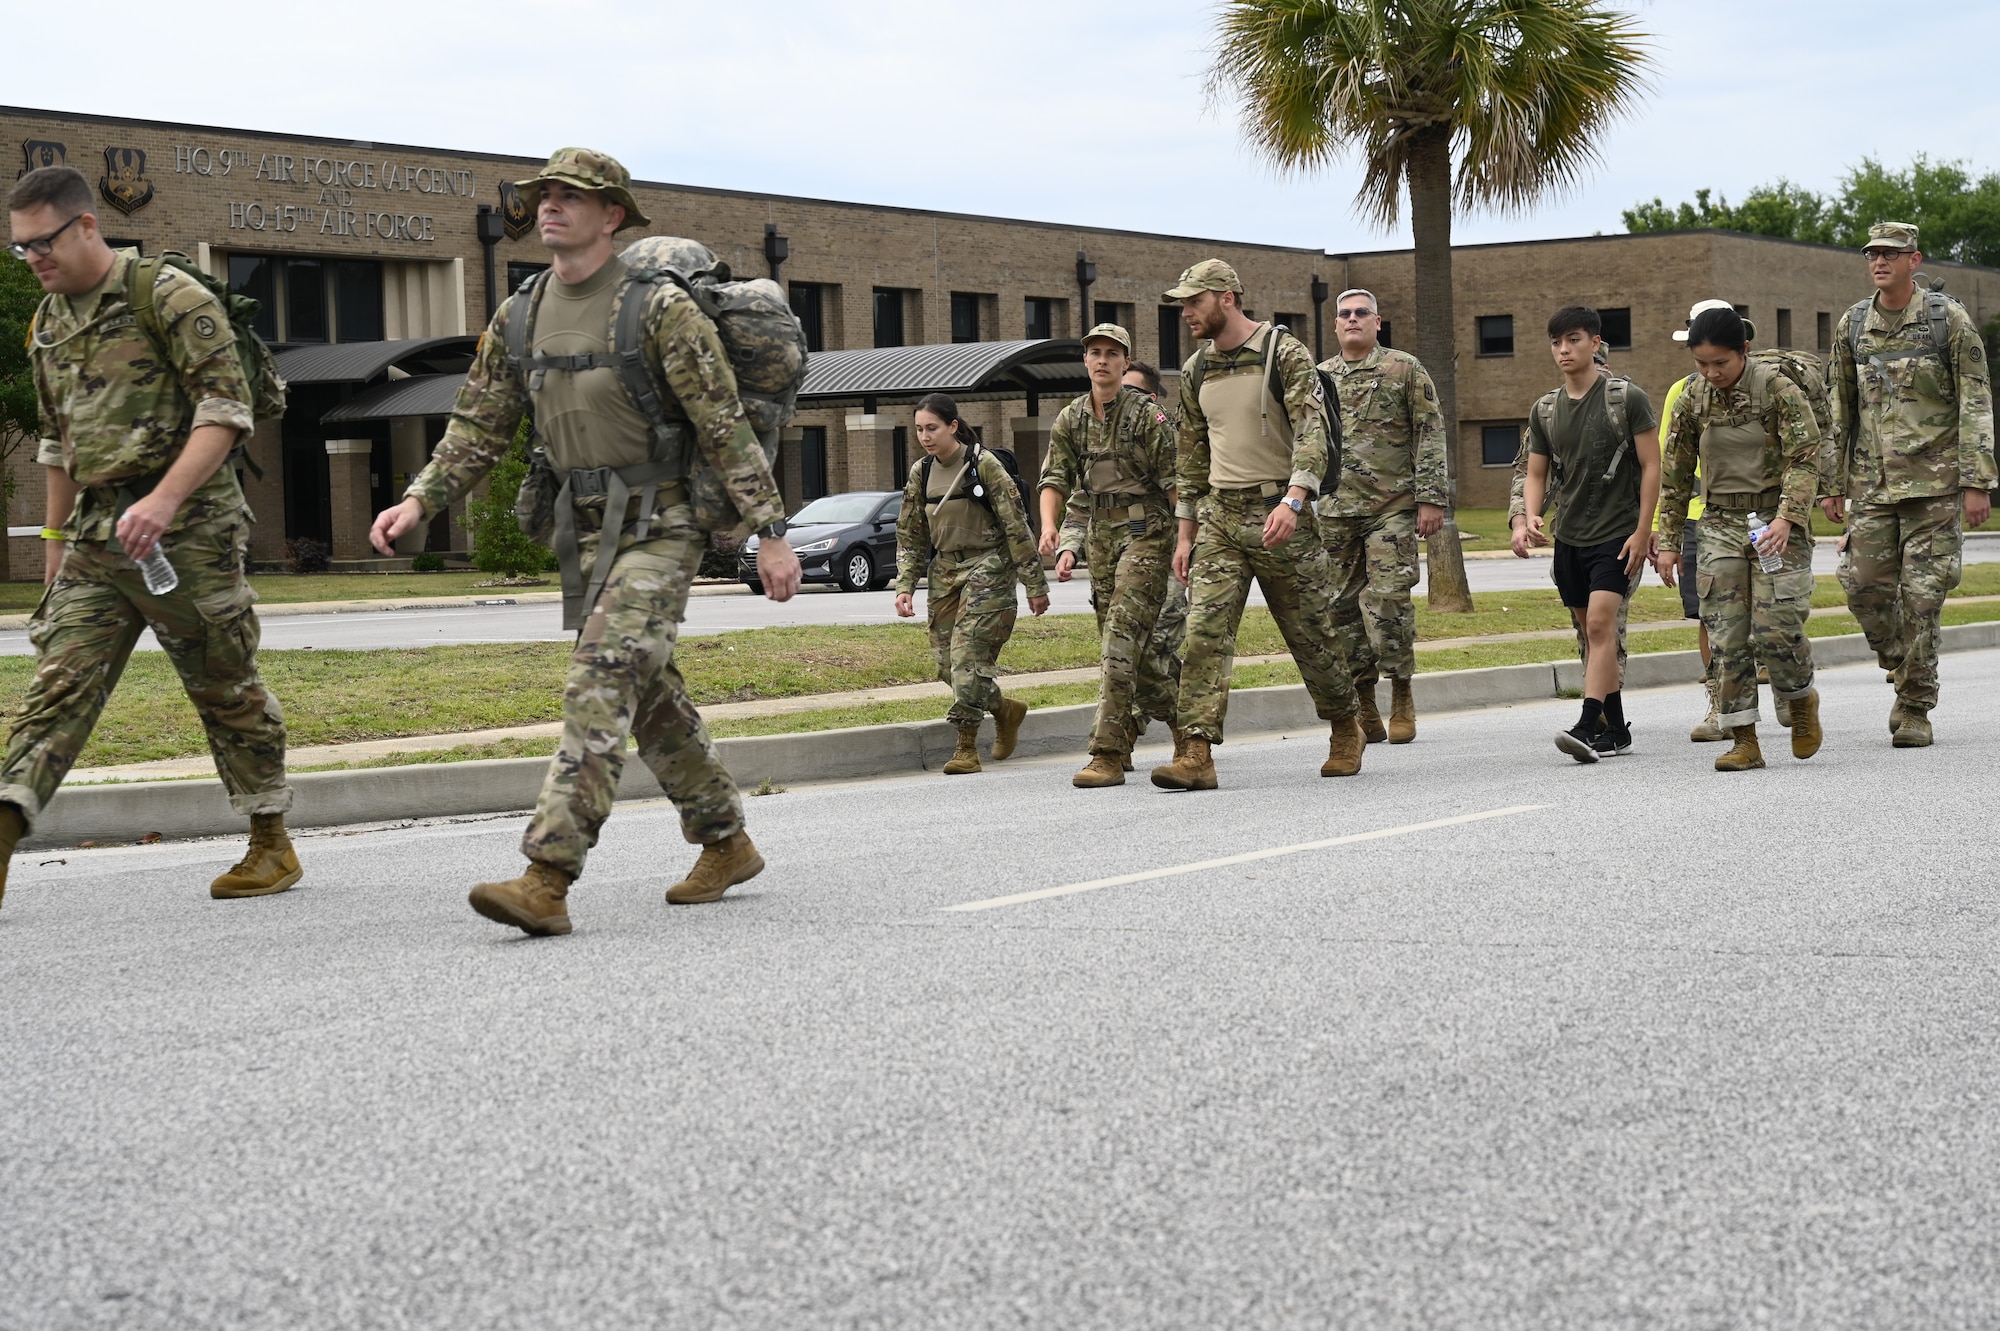 Members from the U.S. Air Force, U.S. Army, Royal Danish Air Force and other coalition partners participate in the Danish Contingency (DANCON) ruck march at Shaw Air Force Base, S.C., June 5, 2021. Traditionally, RDAF members host 25KM (15.5 miles) DANCON ruck marches at the conclusion of team deployments in the Middle East and other locations around the globe. RDAF members recently deployed to Shaw Air Force Base to work side by side with Airmen from the 727 Expeditionary Air Control Squadron, “Kingpin,” and this event marks the first DANCON march held on U.S. soil.